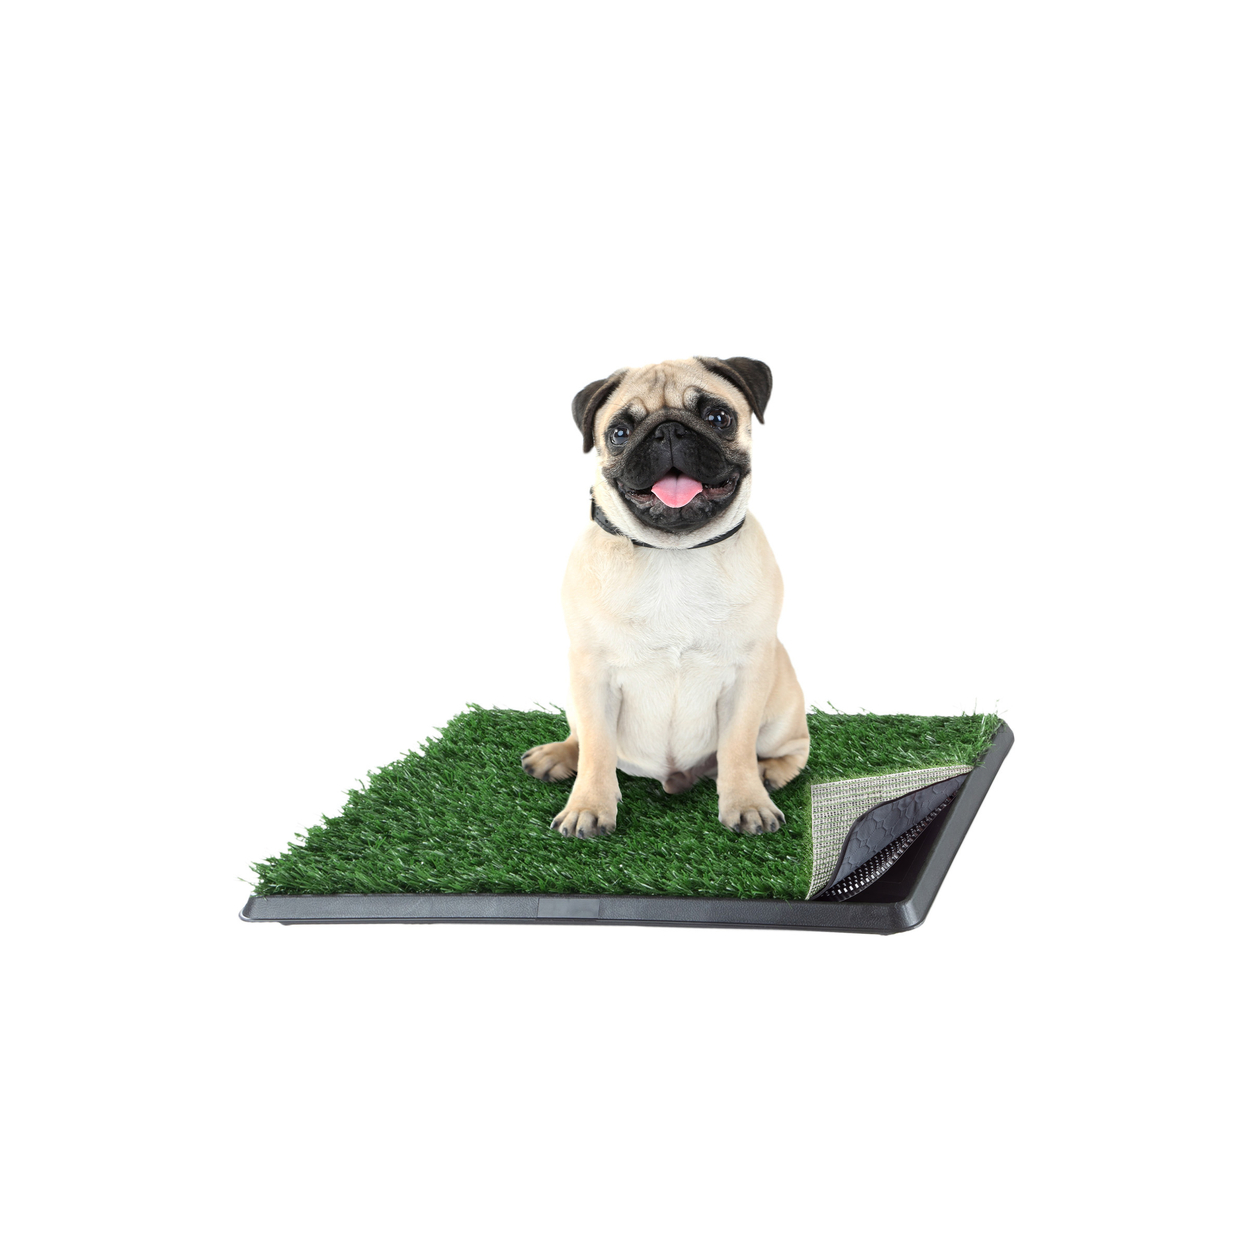 Artificial Grass Puppy Pee Pad For Dogs 6x20 4-Layer Training Potty Pad Tray